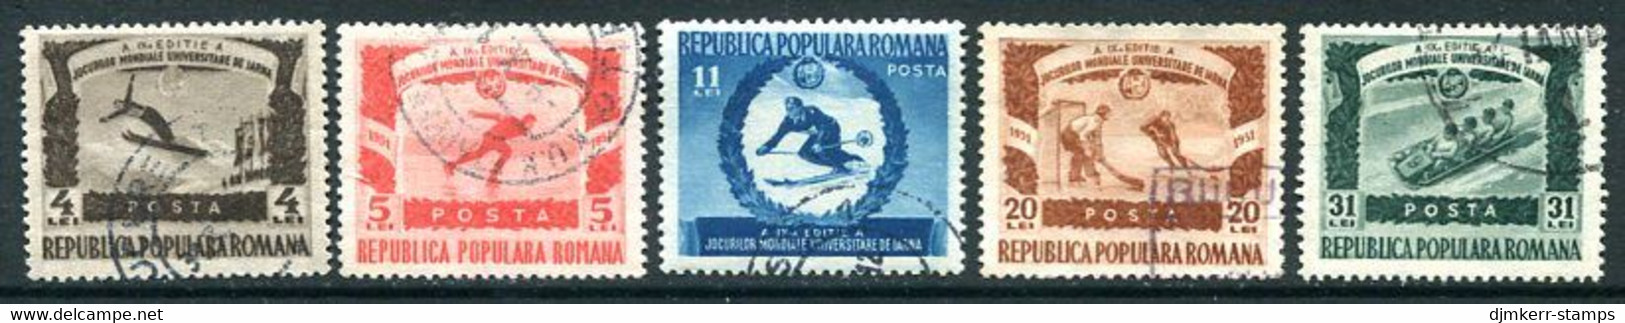 ROMANIA 1951 University Winter Games  Used  .  Michel 1247-51 - Used Stamps